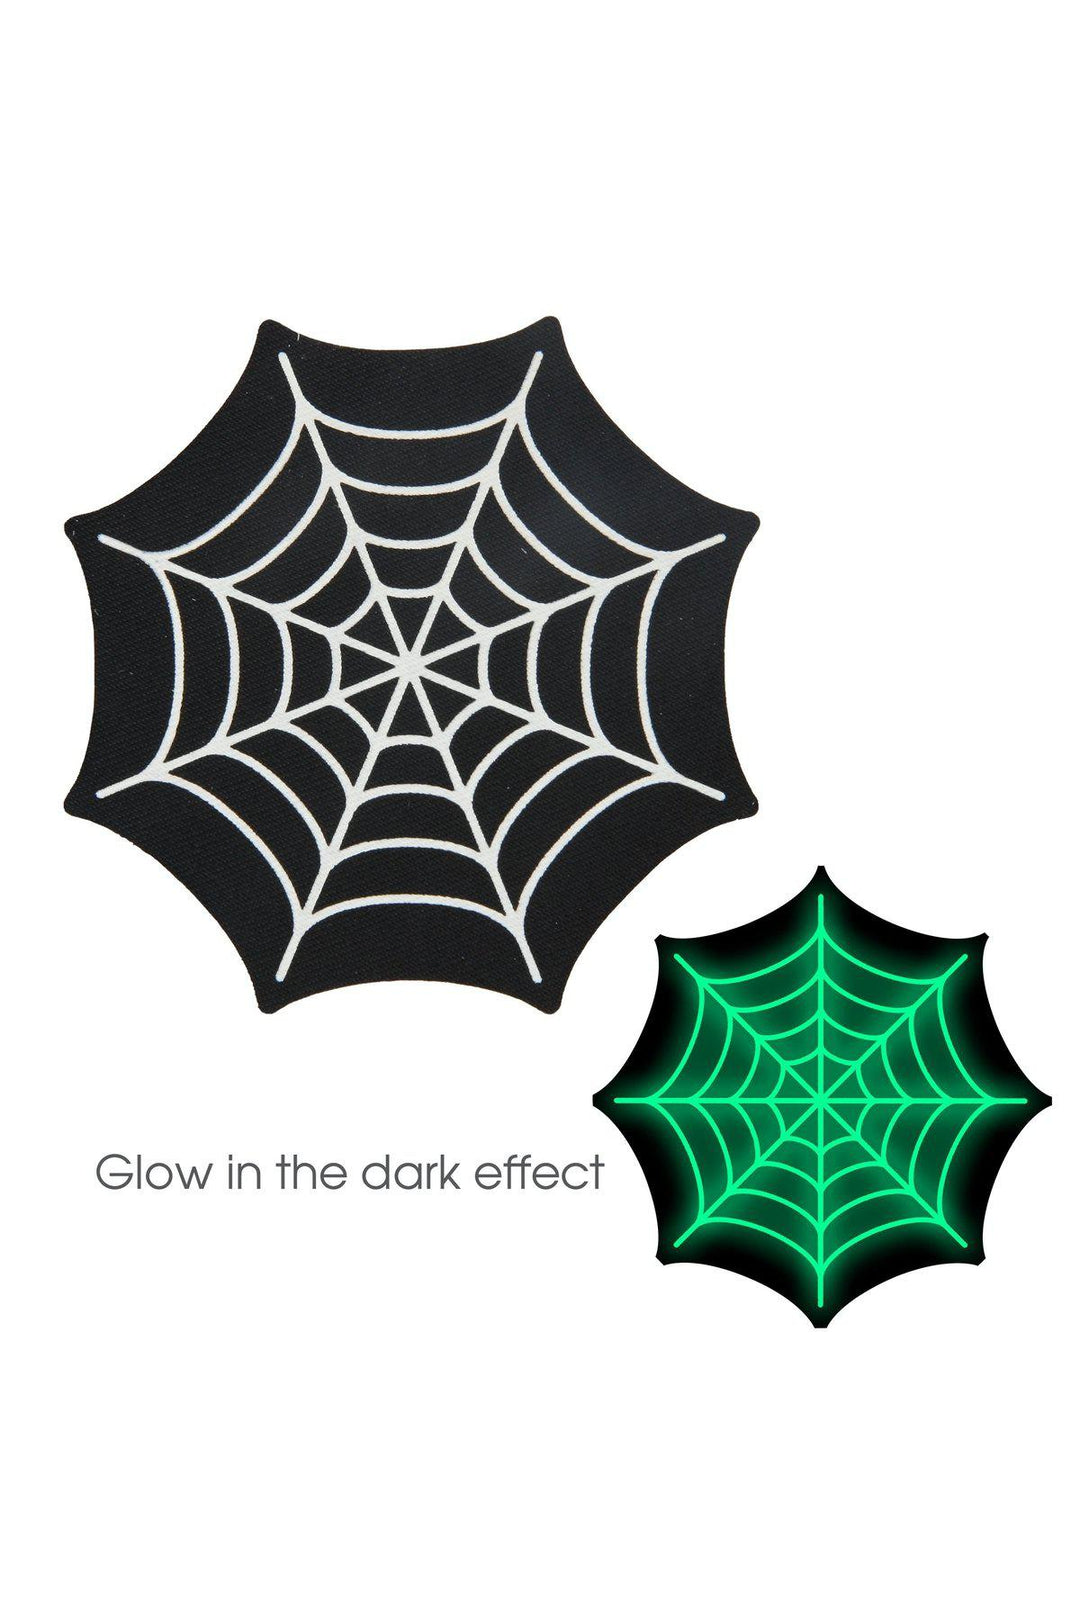 Glow in the Dark Spider Web Pasty-Pasties-Peekaboo Pasties-Green-O/S-SEXYSHOES.COM